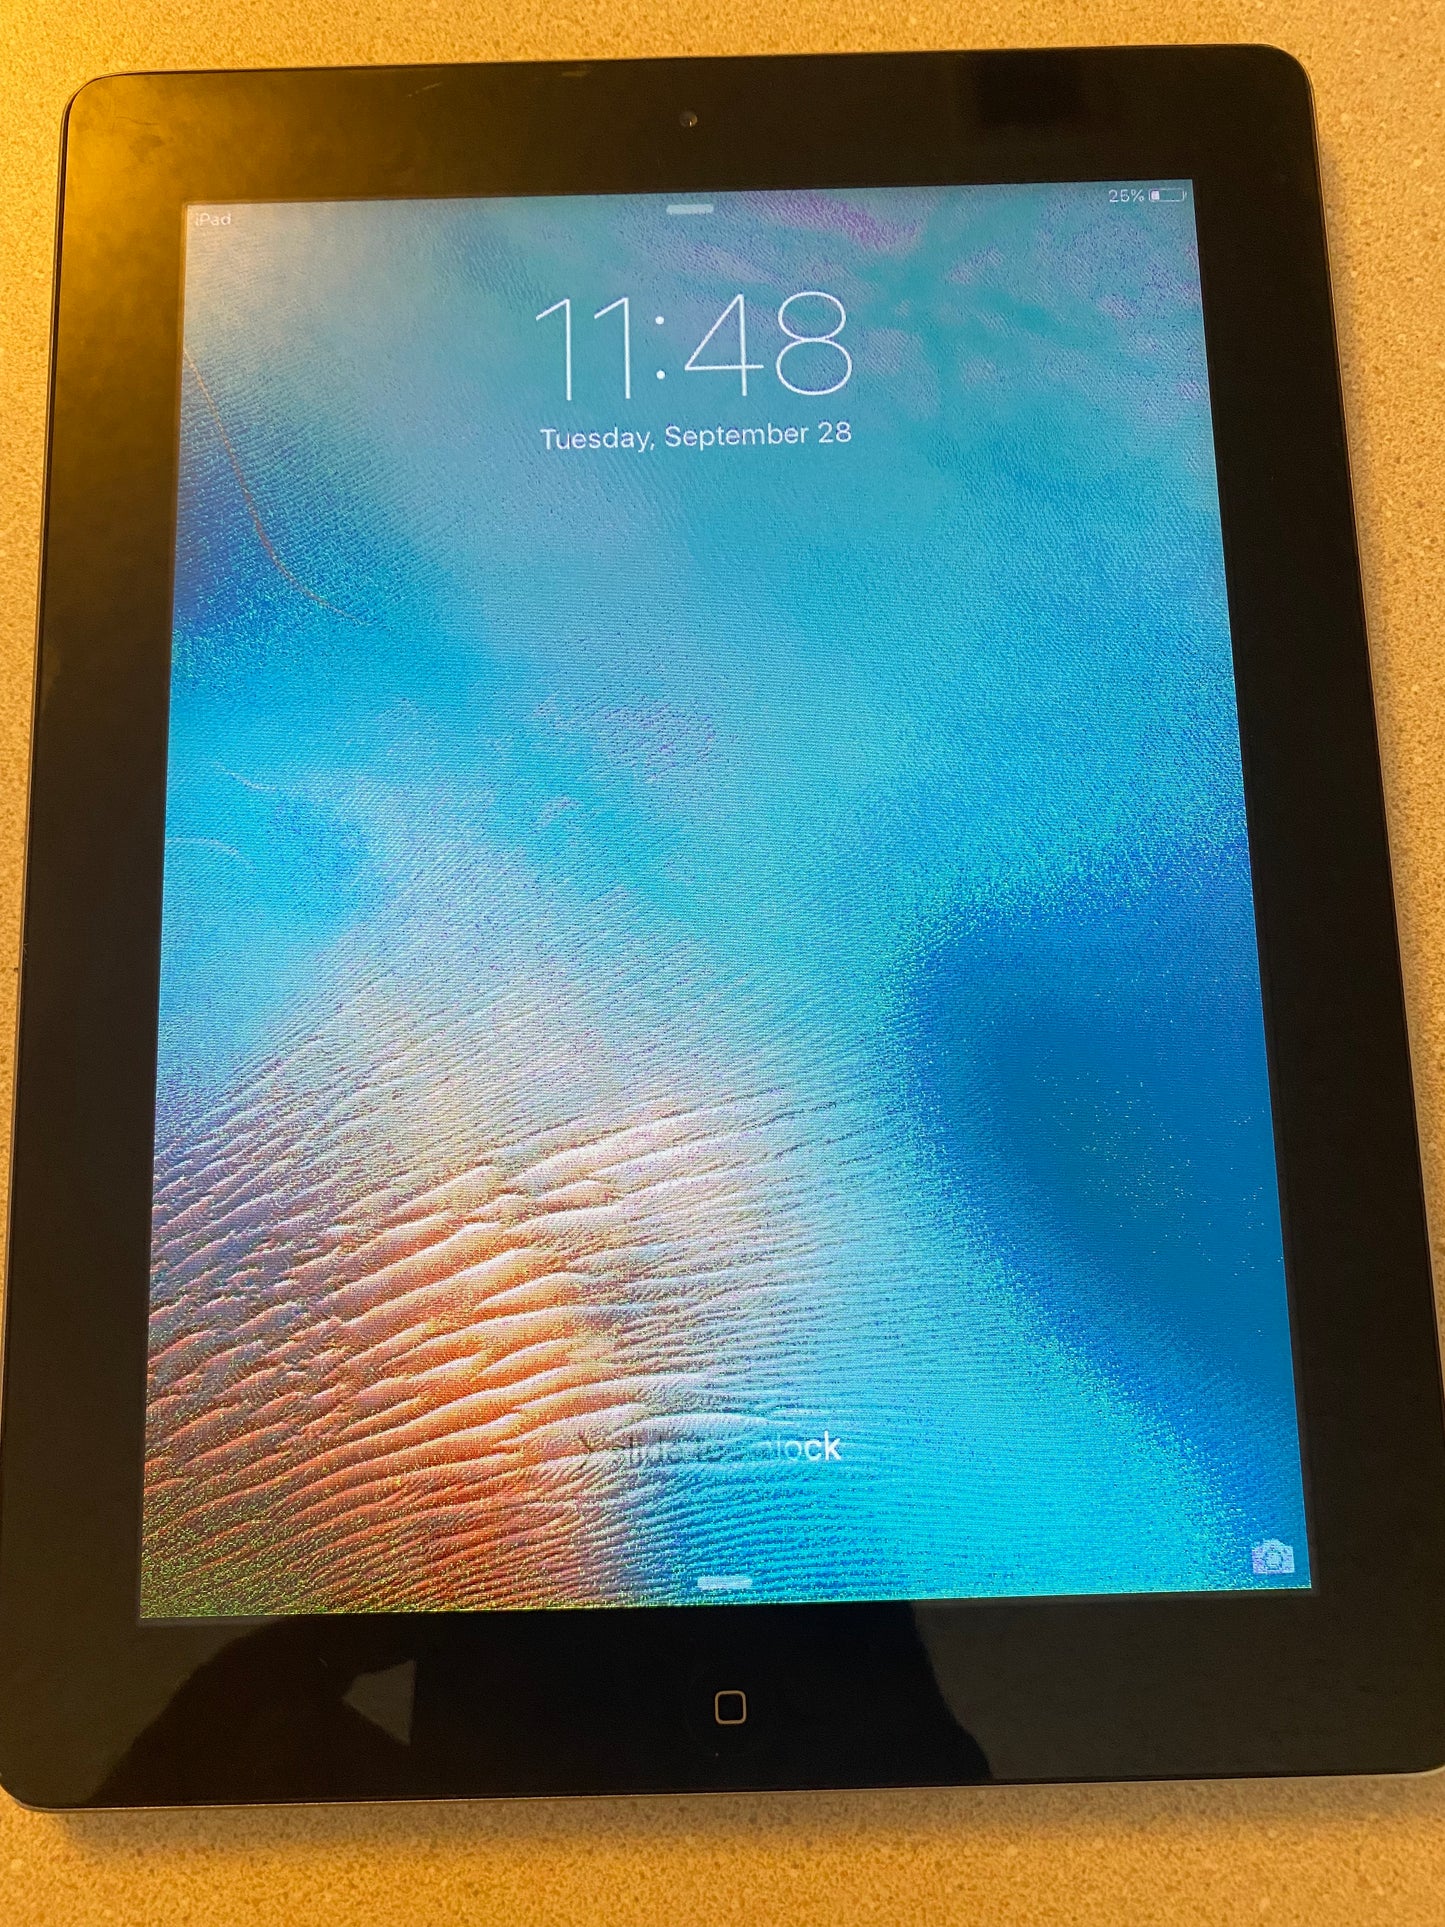 (As-Is) Apple iPad 2 16GB, Wi-Fi (Unlocked), 9.7in - Black - A1395 Color Issue